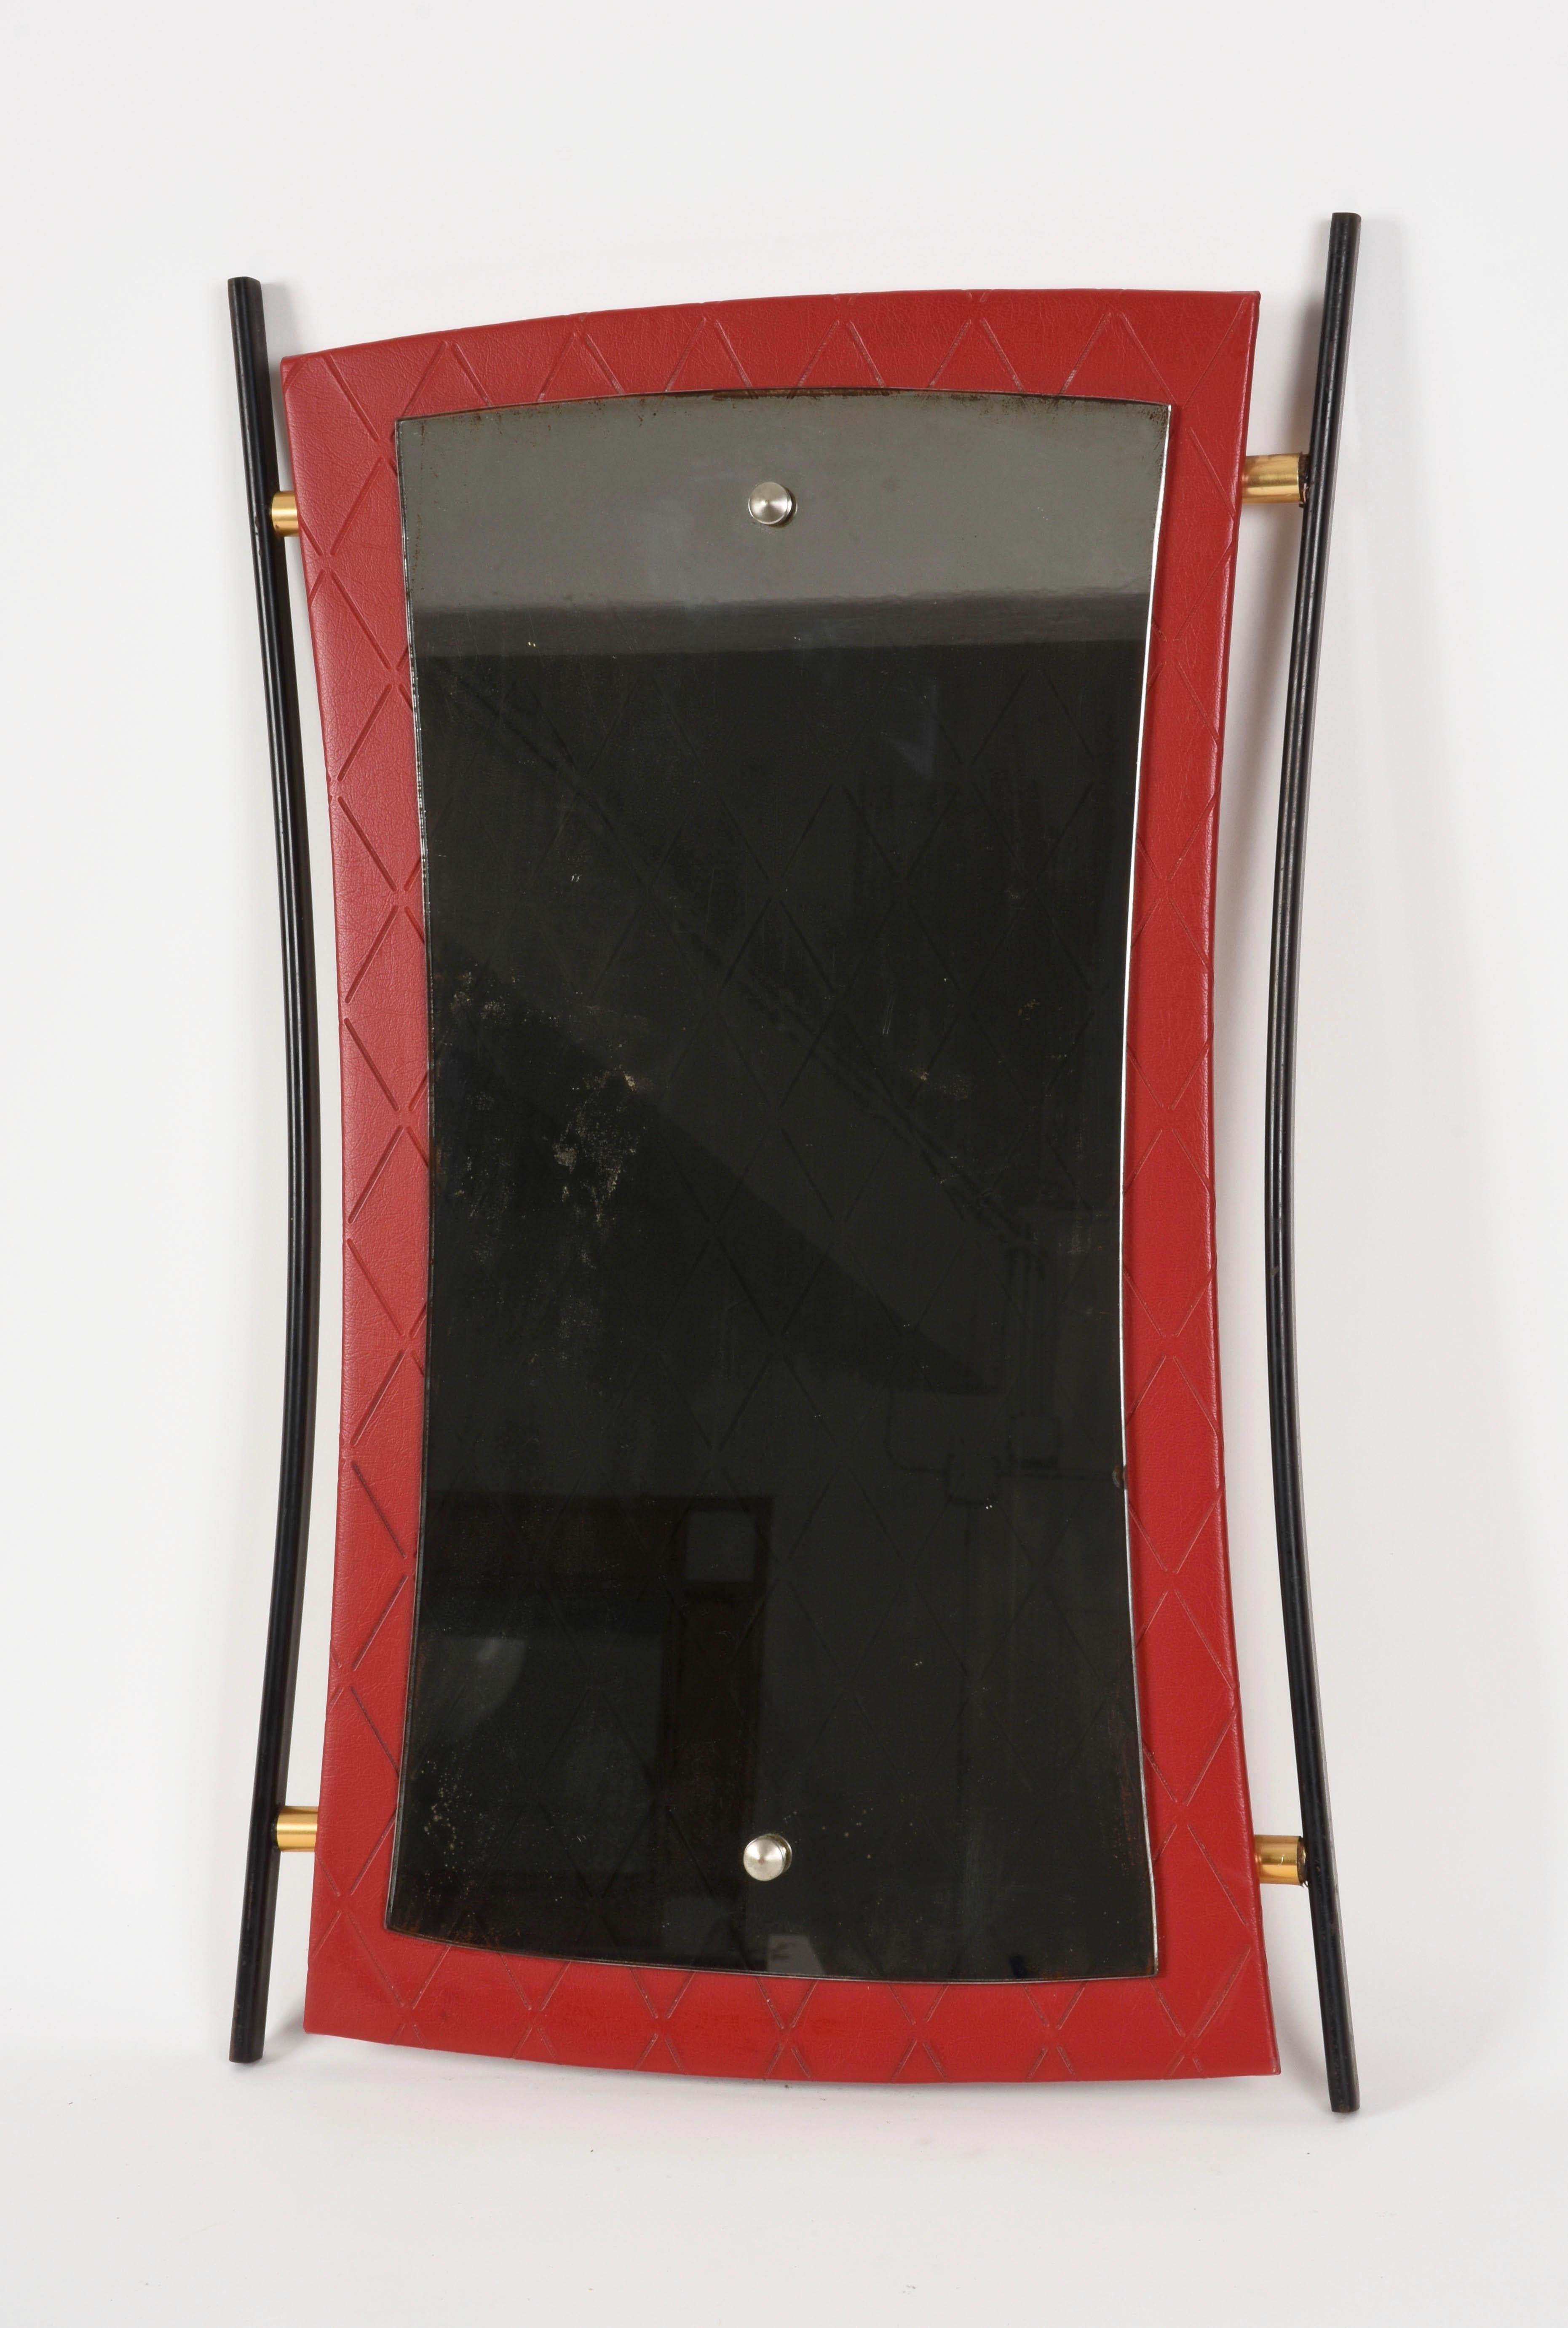 Lacquered Midcentury Cesare Lacca Enameled Iron, Wood and Brass Italian Wall Mirror, 1950s For Sale